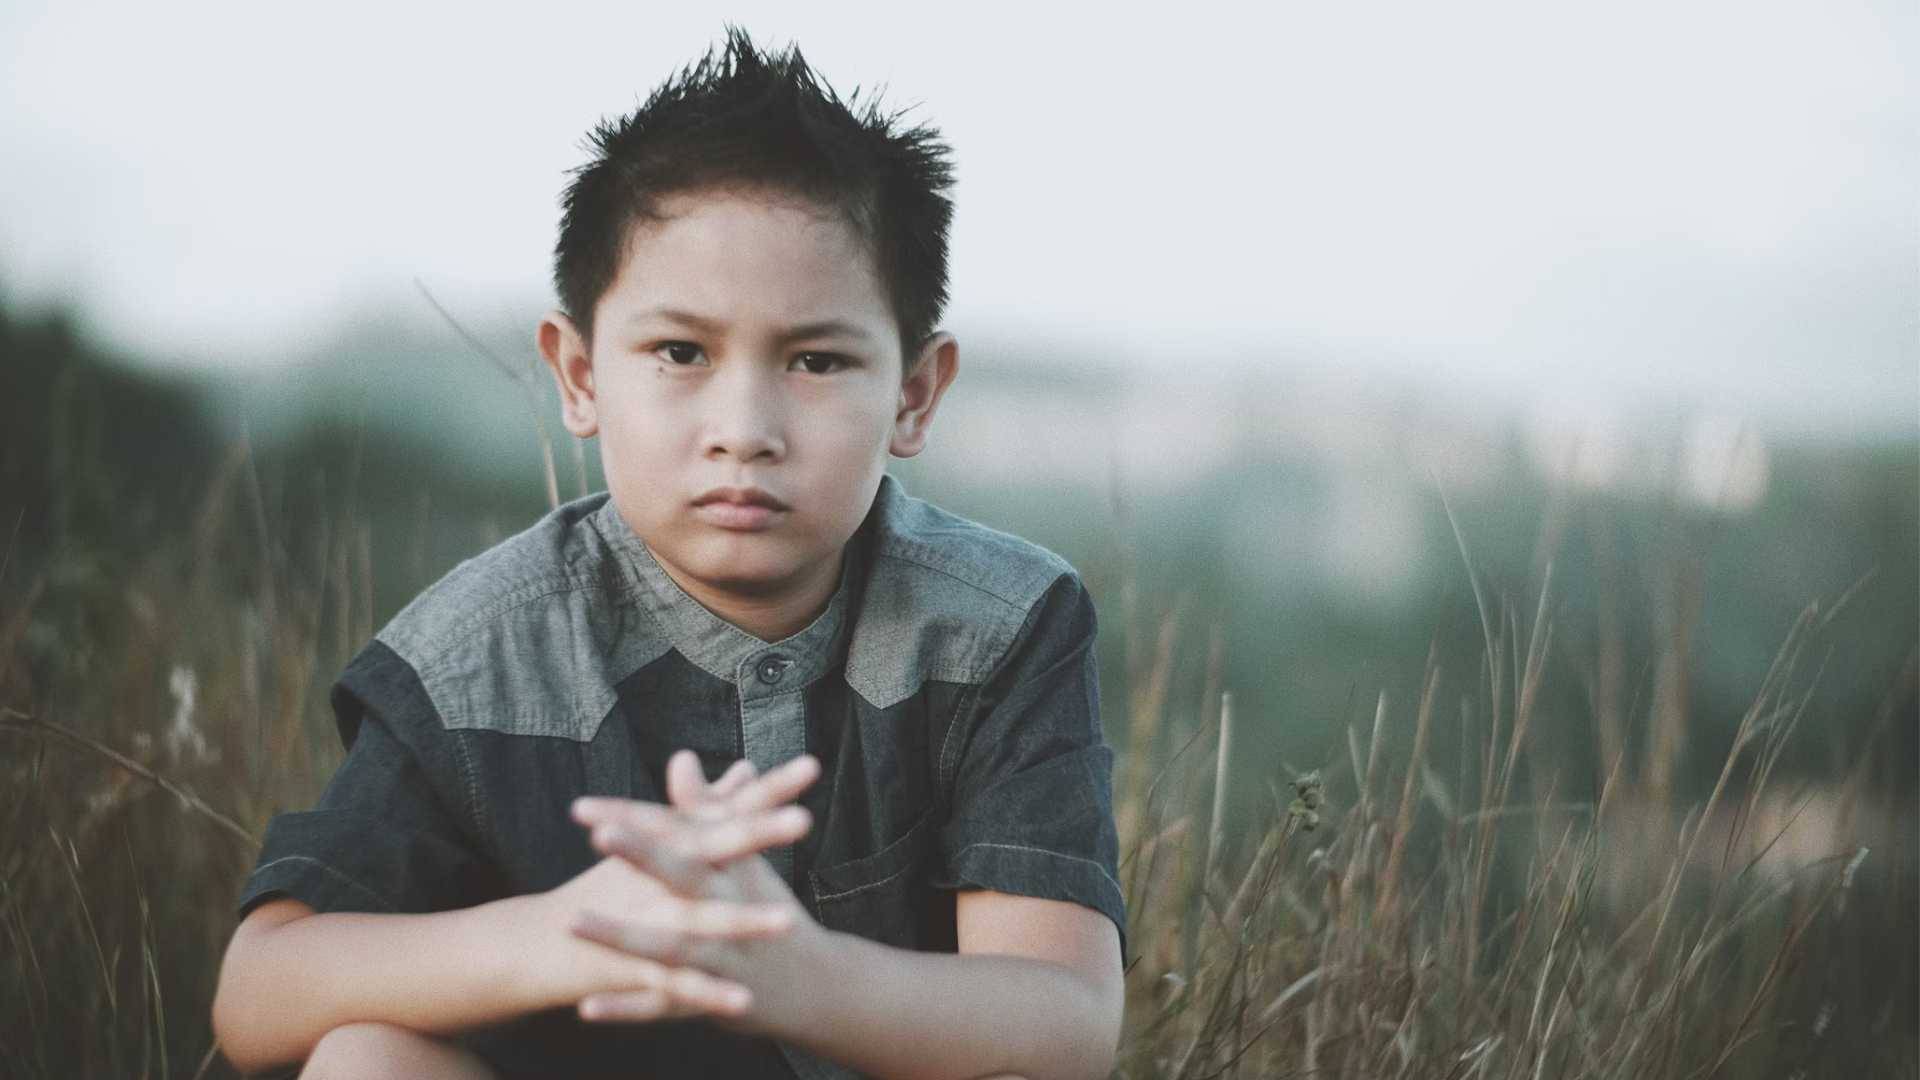 Young boy crouching in a field